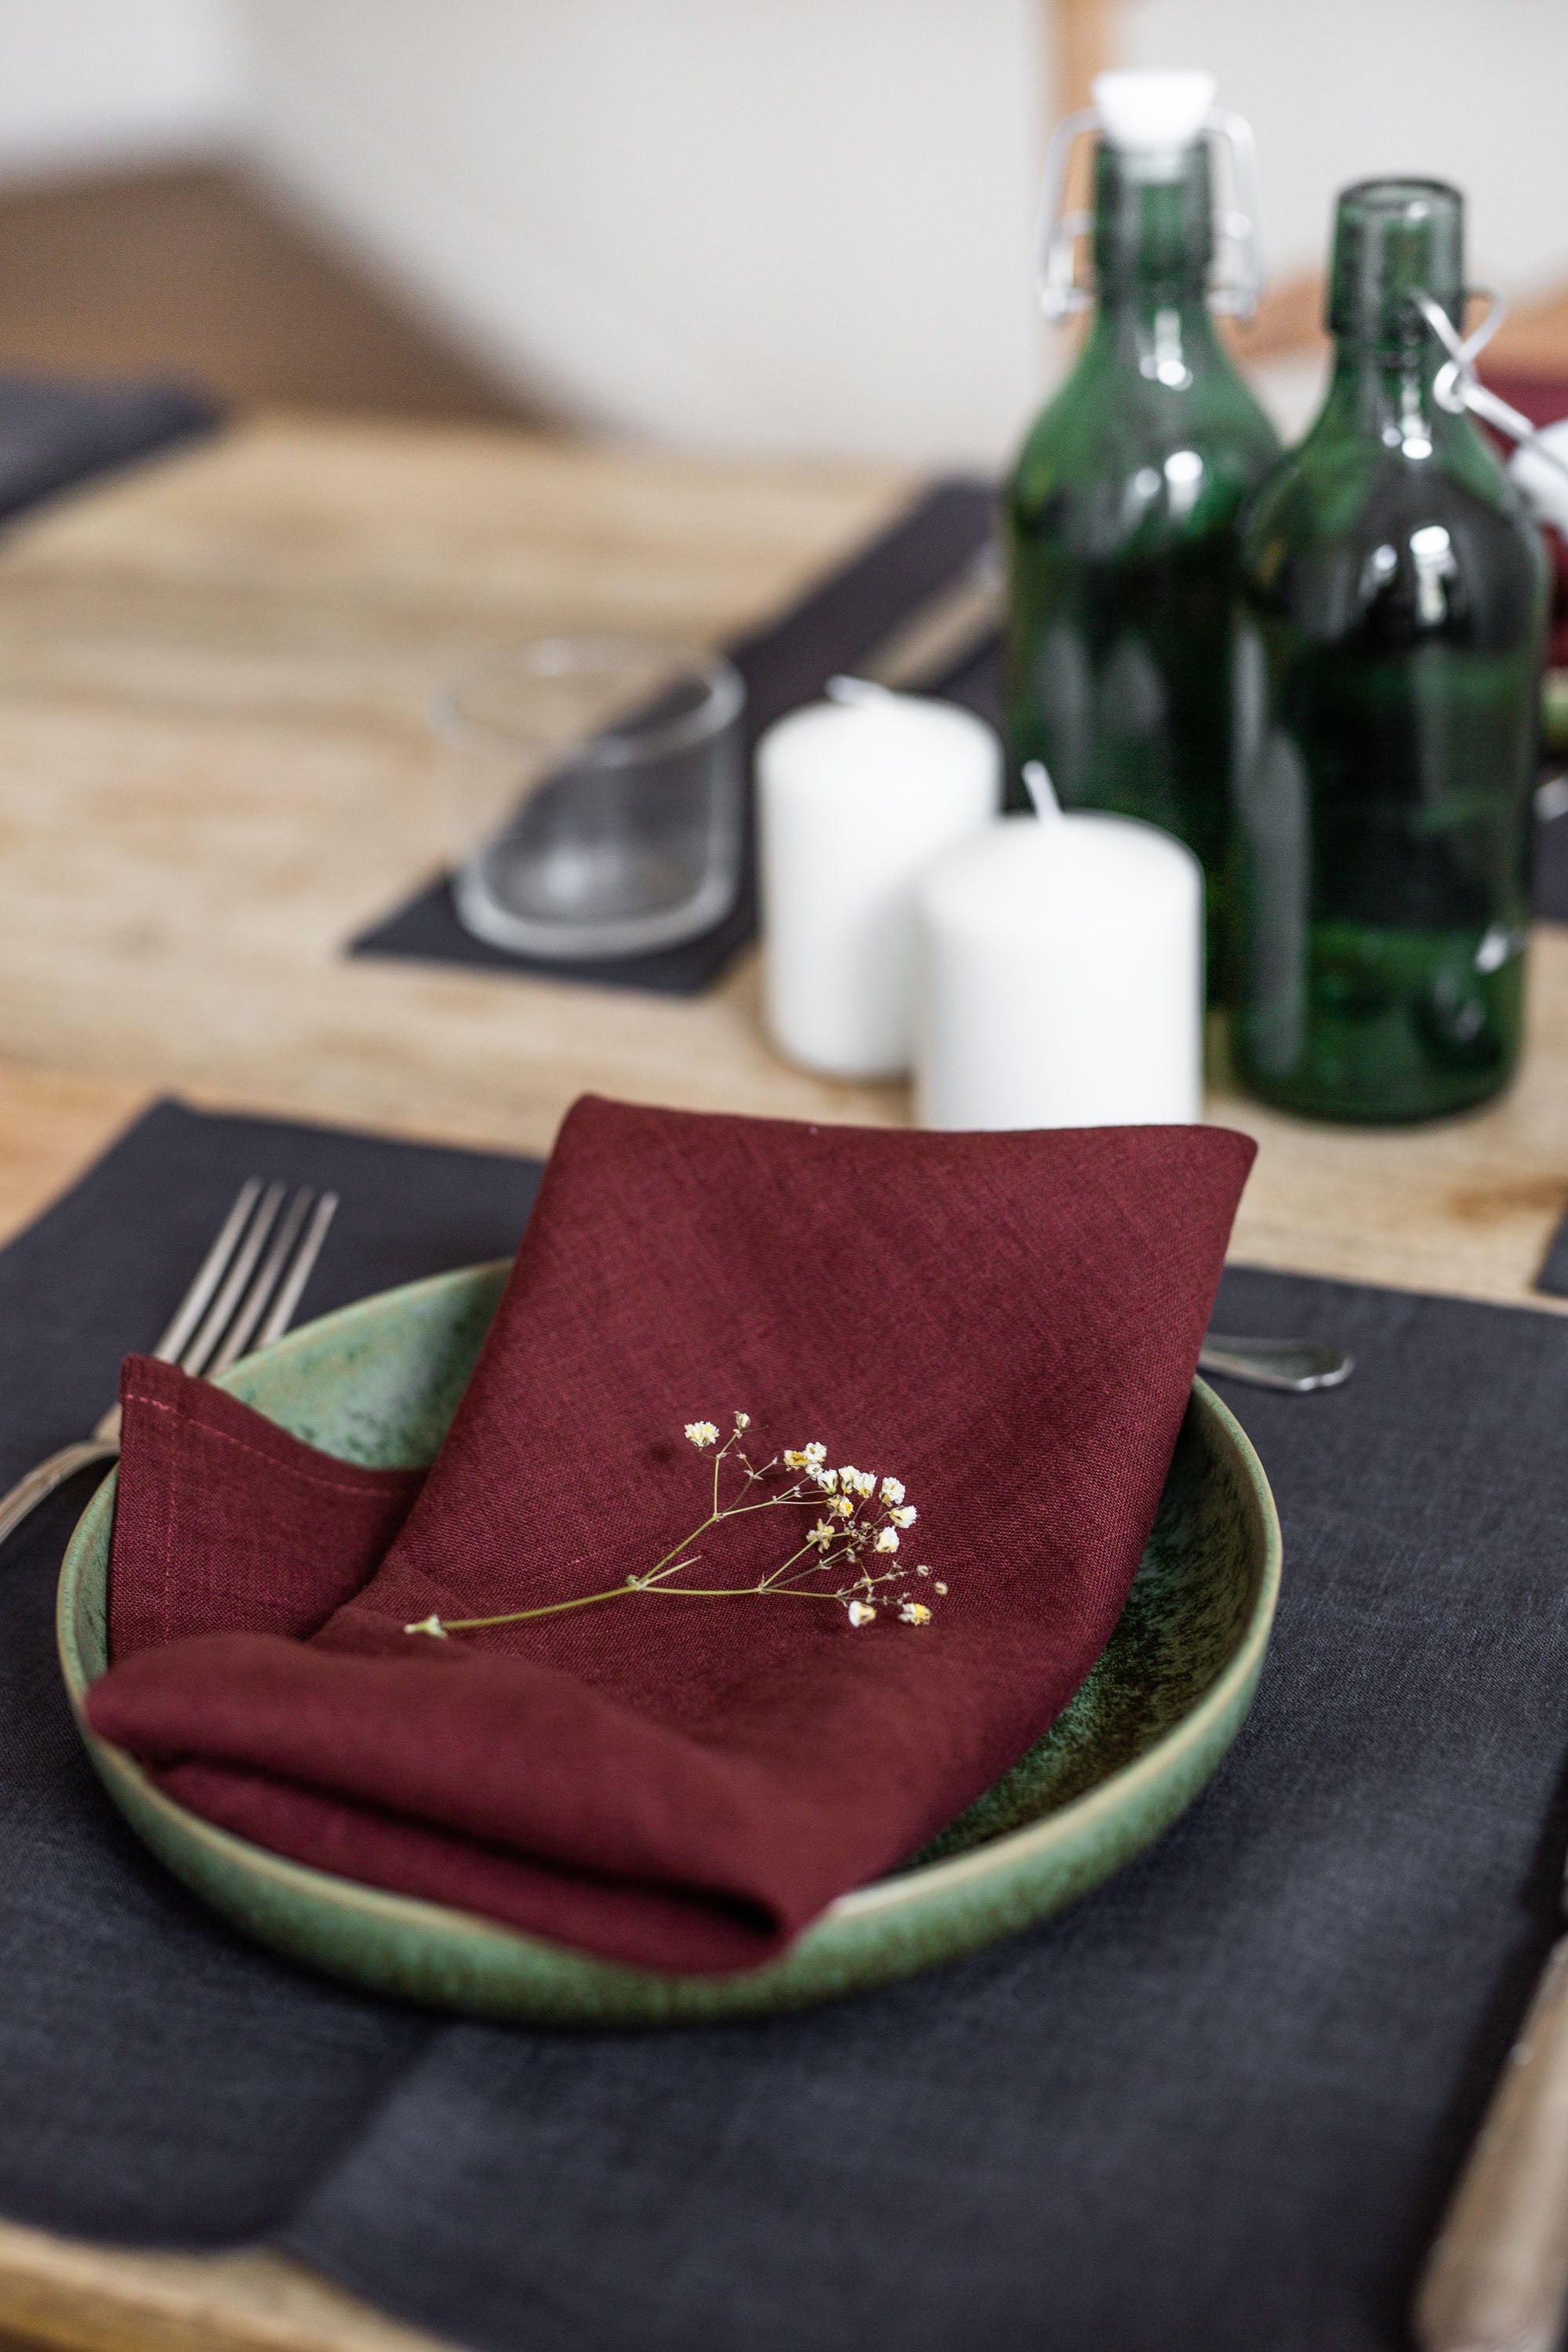 Set Dinner Table With A Focus on Terracotta Linen Napkins By AmourlInen